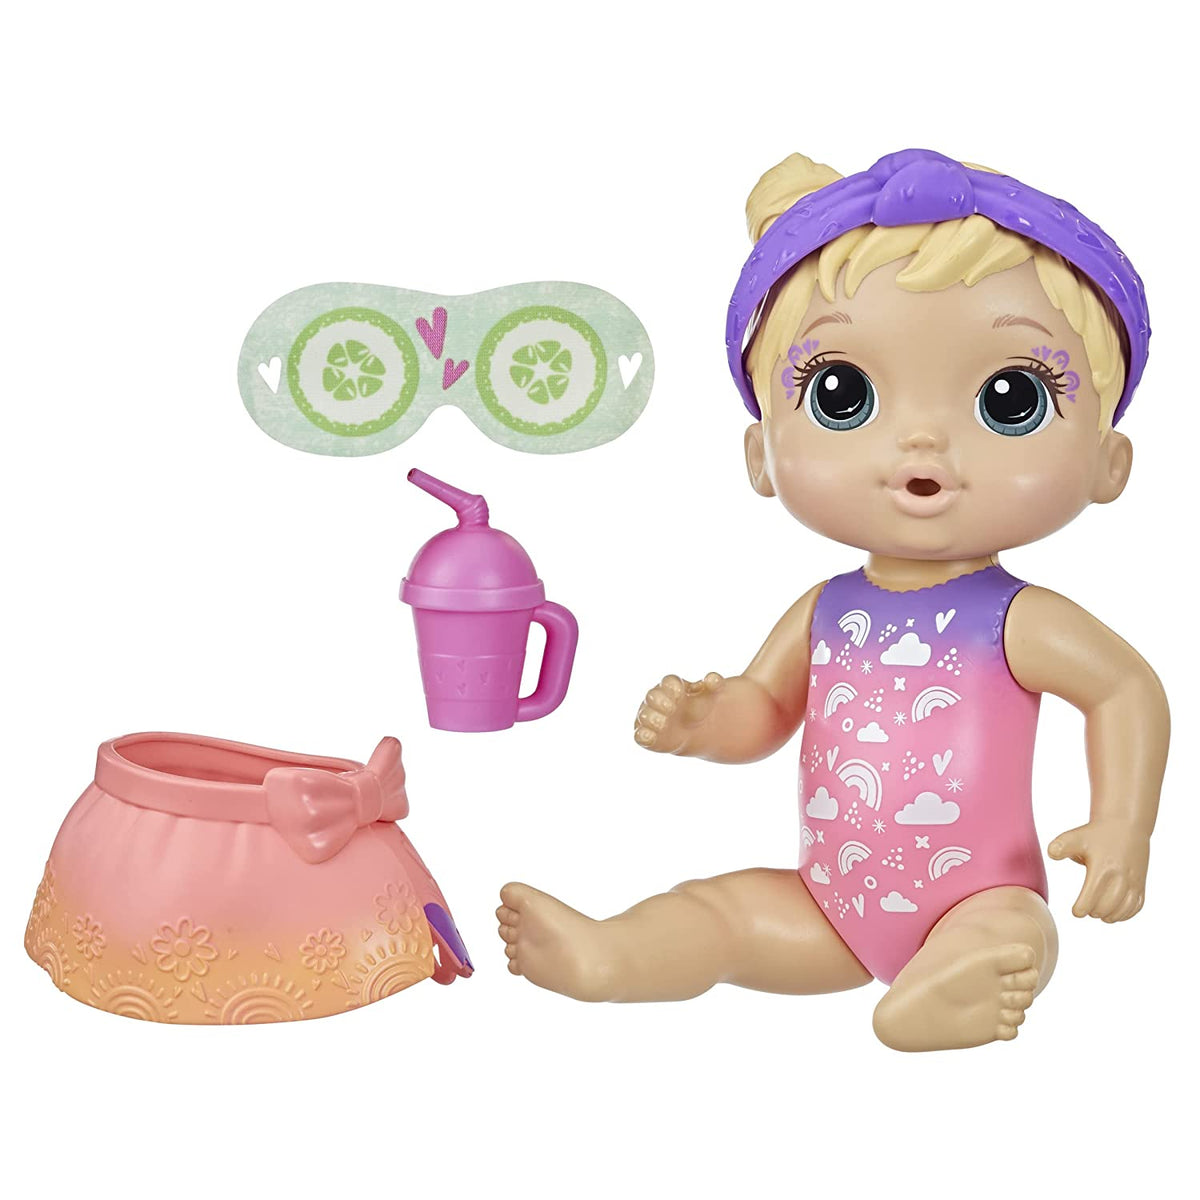 Baby Alive 9-Inch Rainbow Spa Blonde Hair Baby Doll with Eye Mask and Bottle for Kids Ages 3 and Up